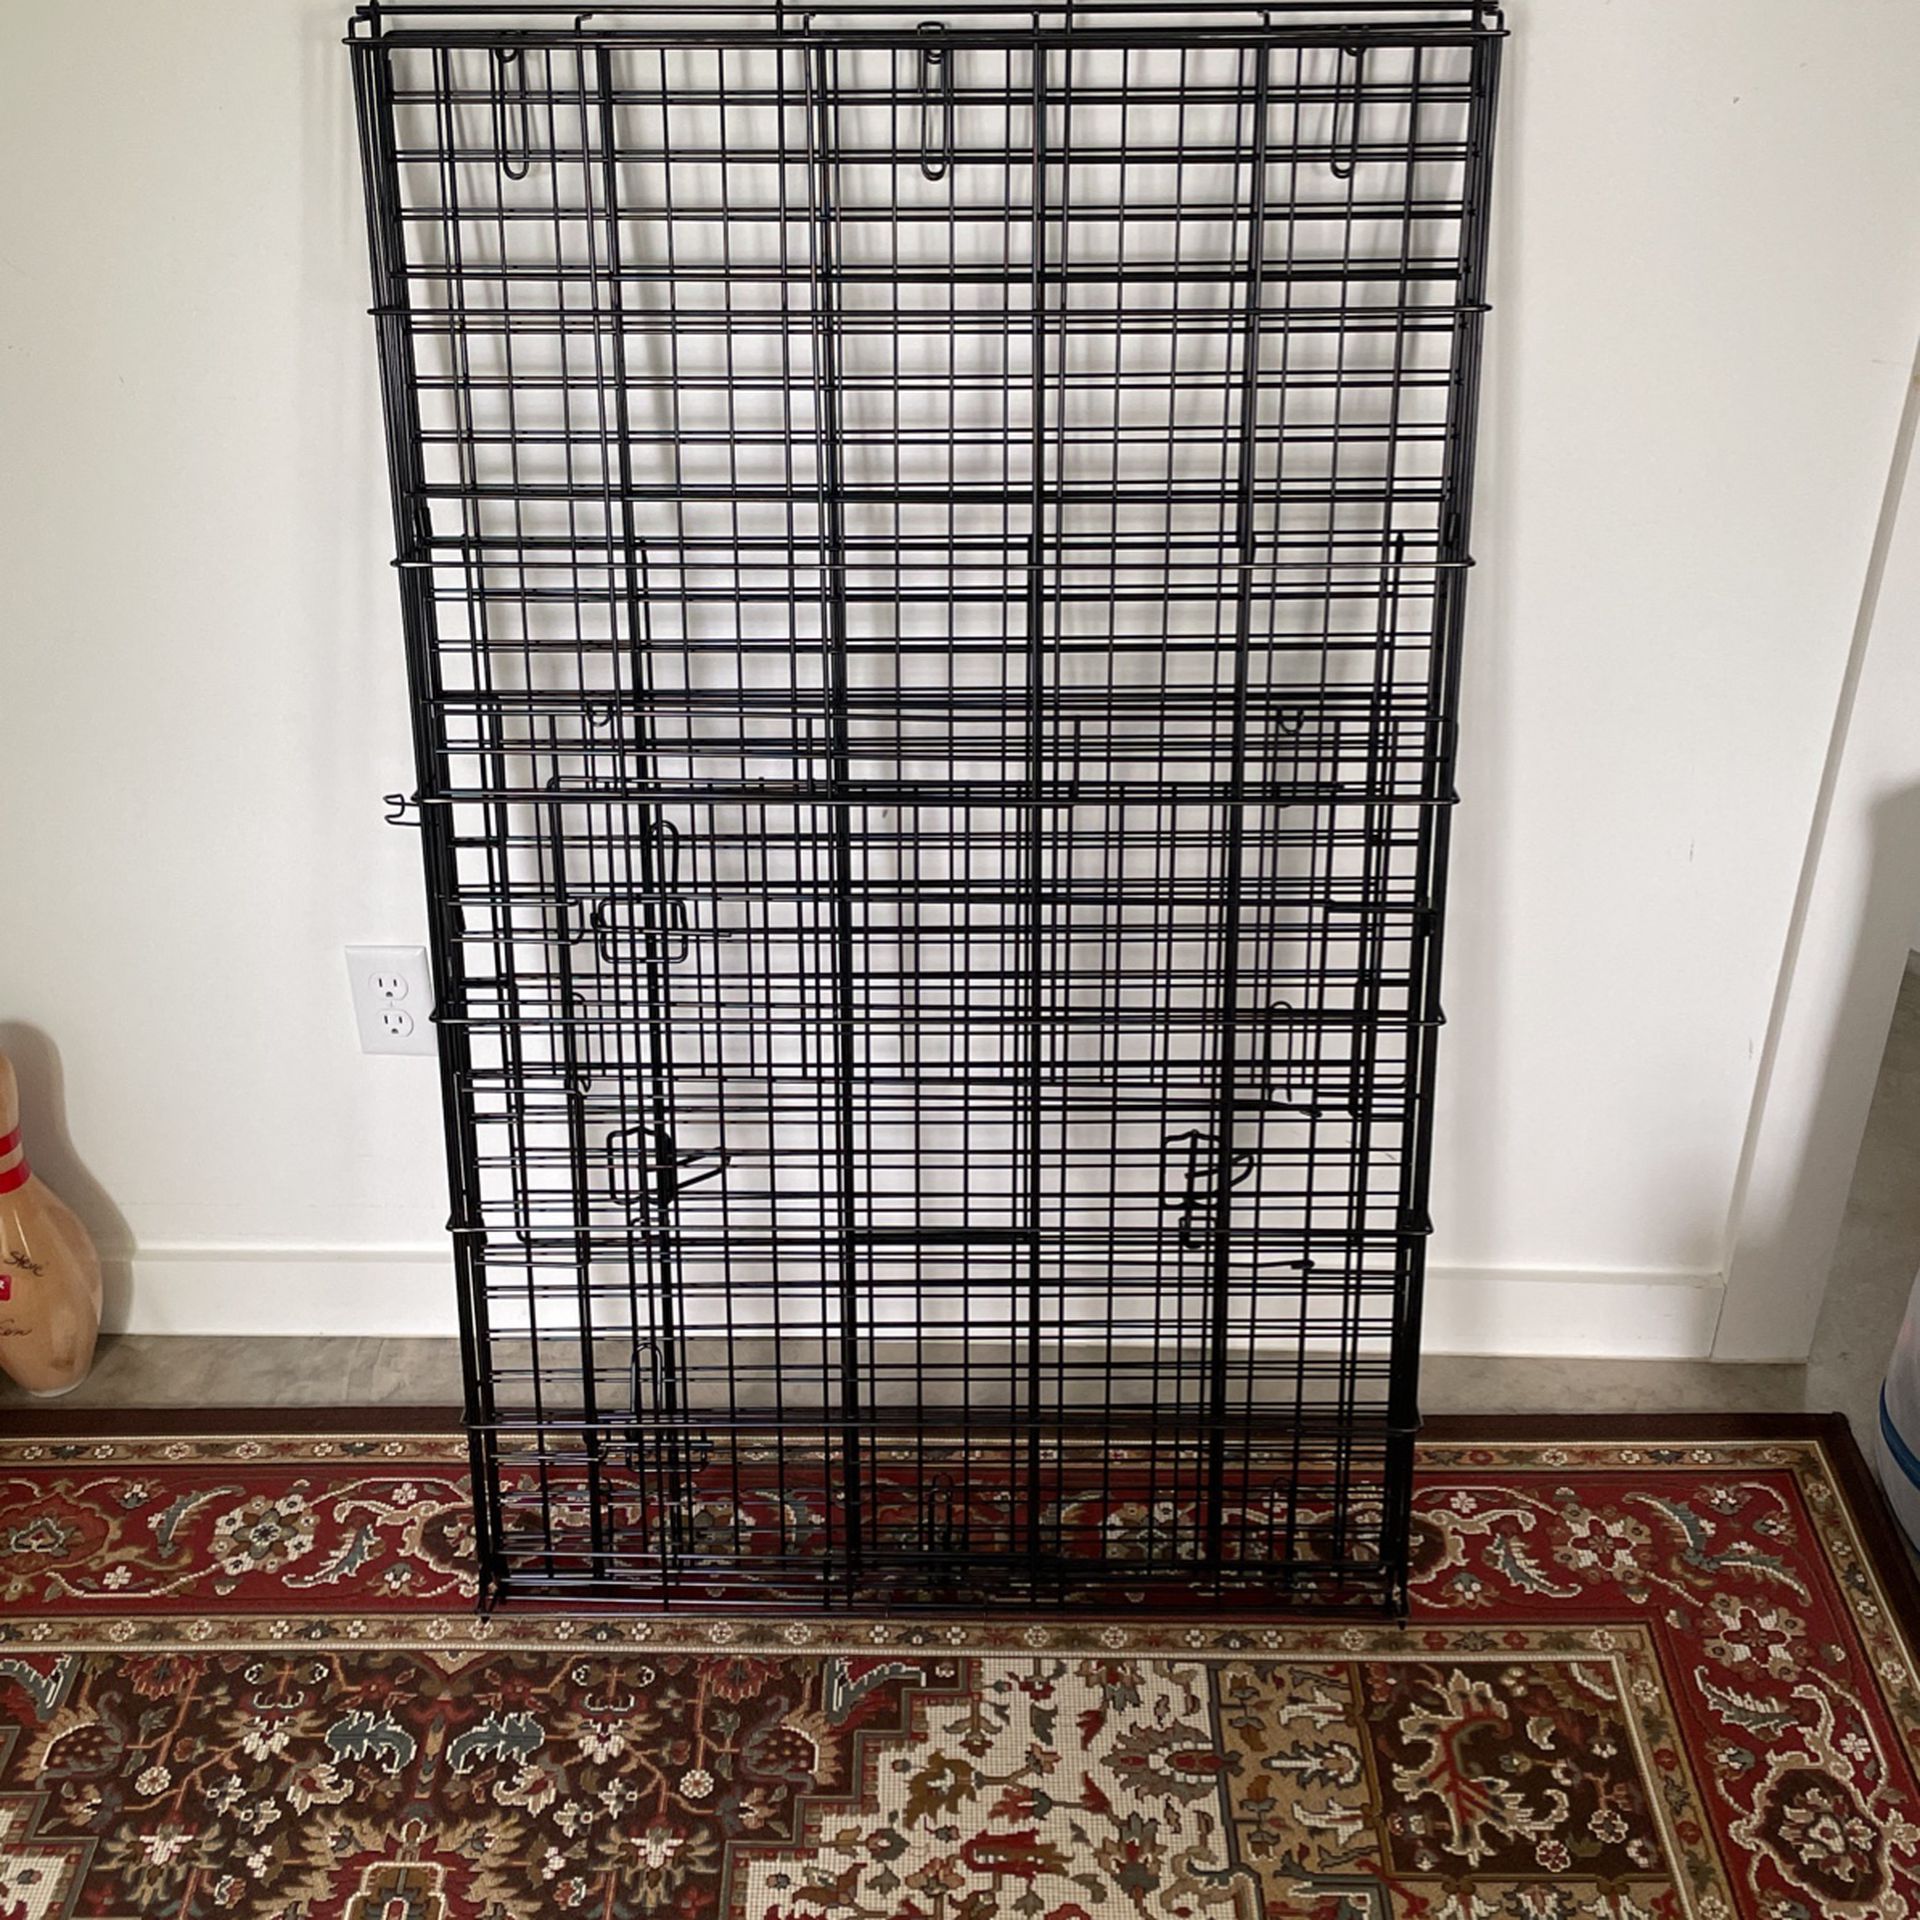 Dog Crate 48 Inch, Kennel Cage 30” W x 30” H x 48” L (NO plastic tray)